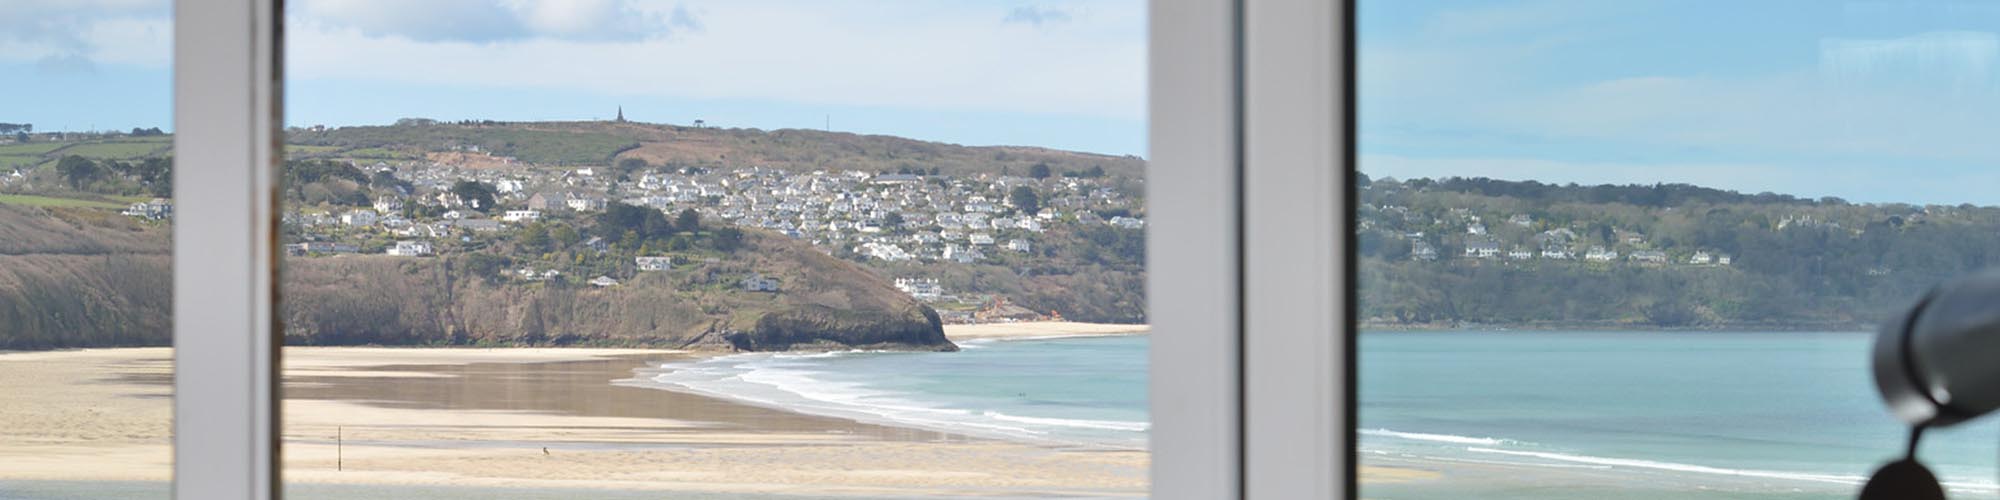 Self Catering Portreath - Chymoresk